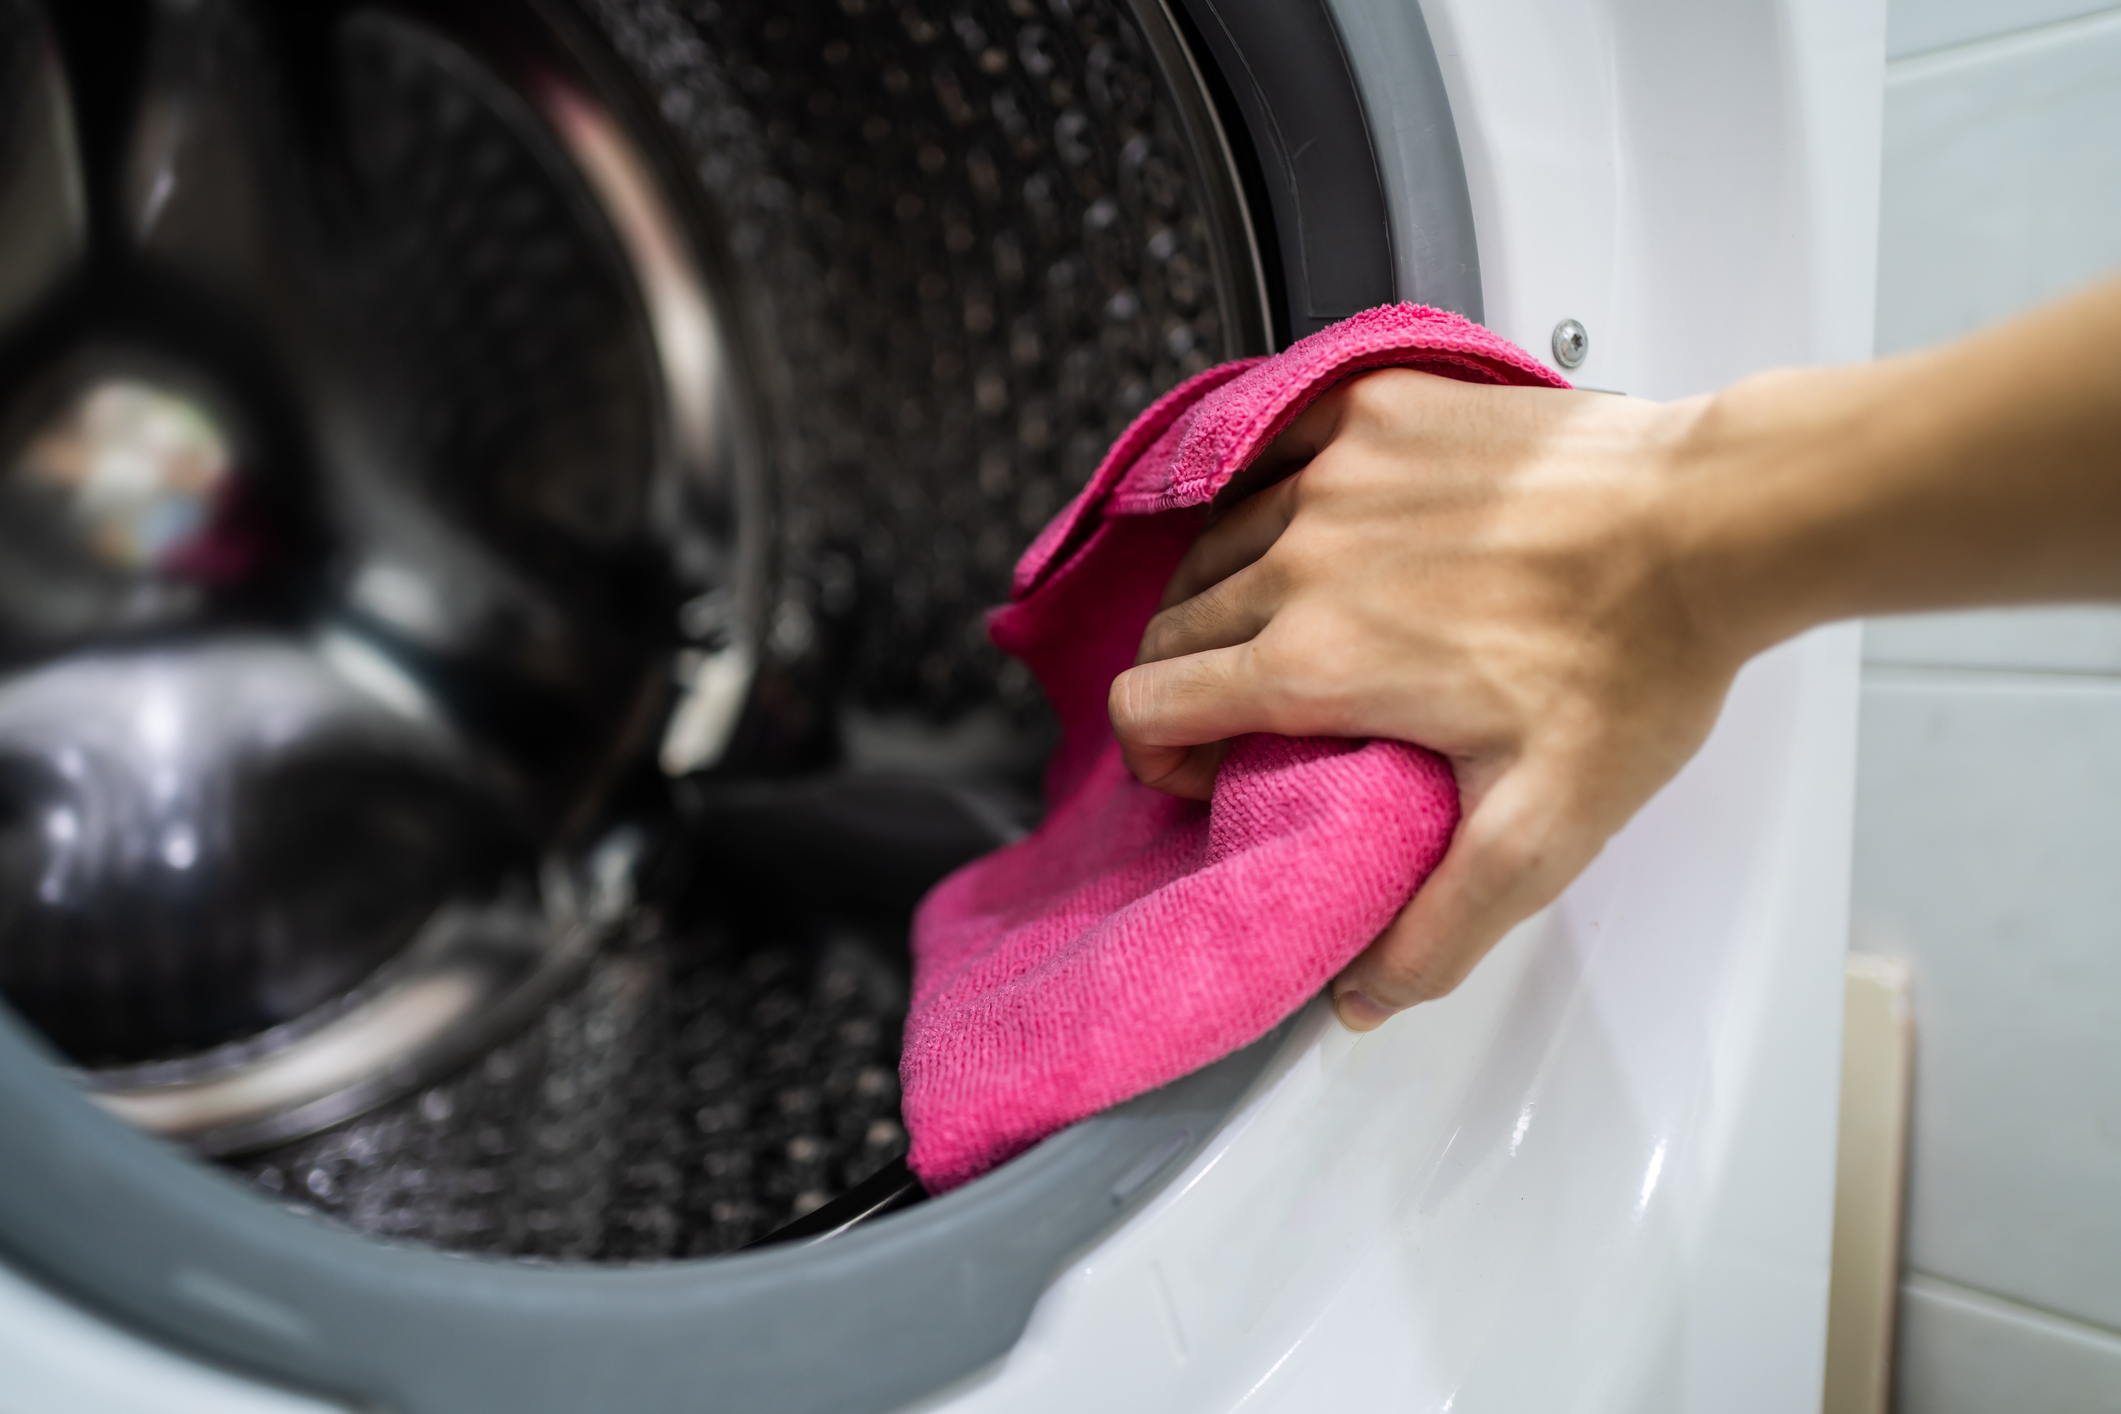 HOW TO clean your front load washing machine  How often to clean, cleaning  lint trap, gasket, drum 